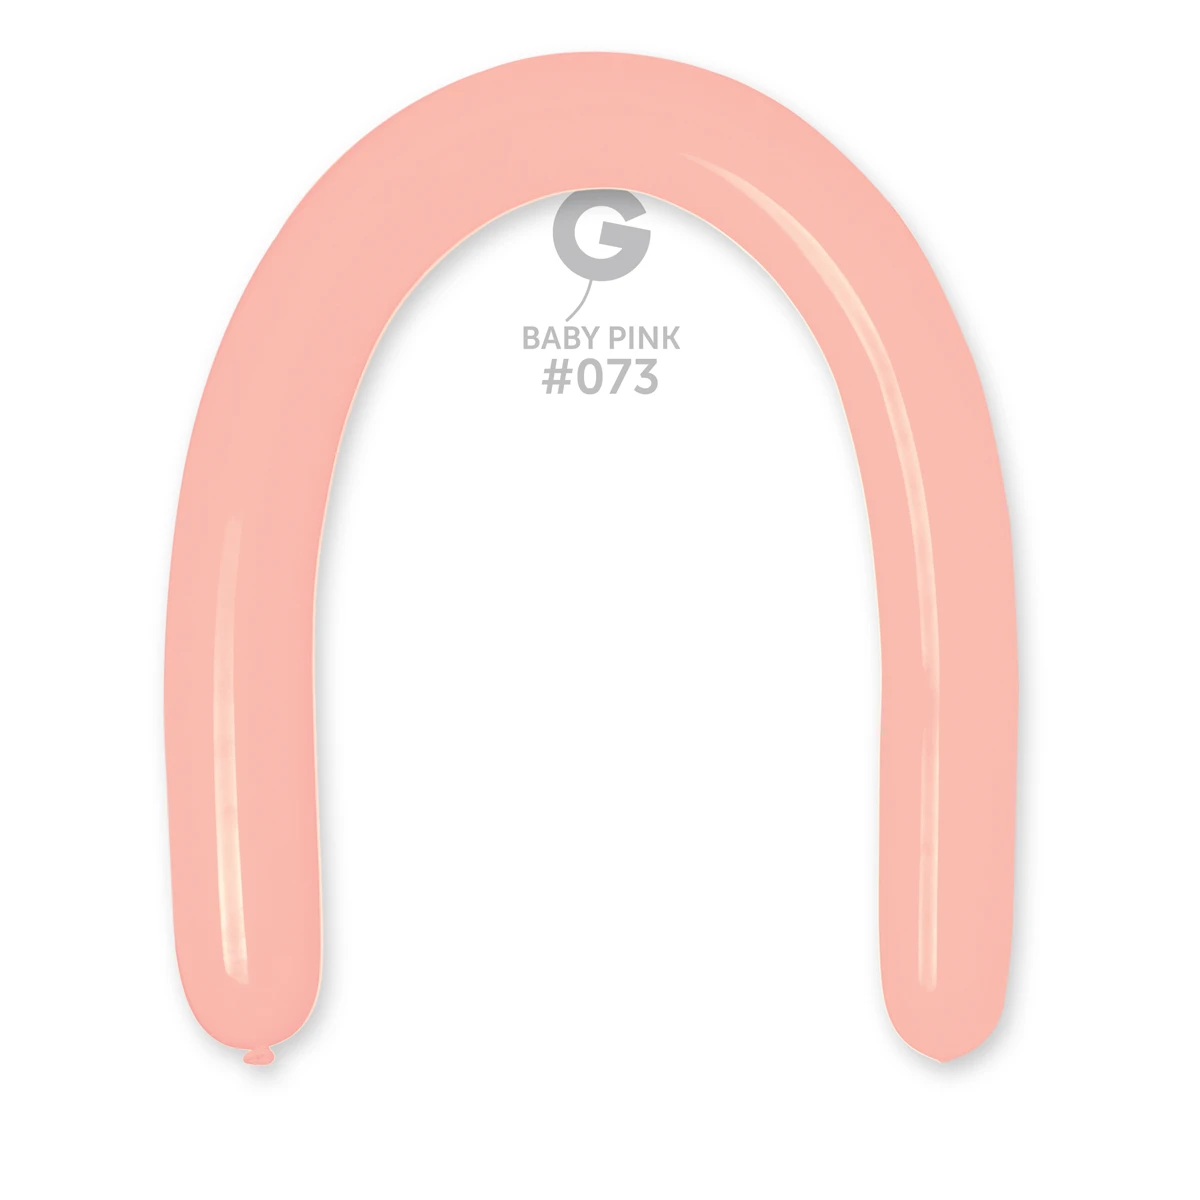 Standard Baby Pink #073 3in – 50 pieces